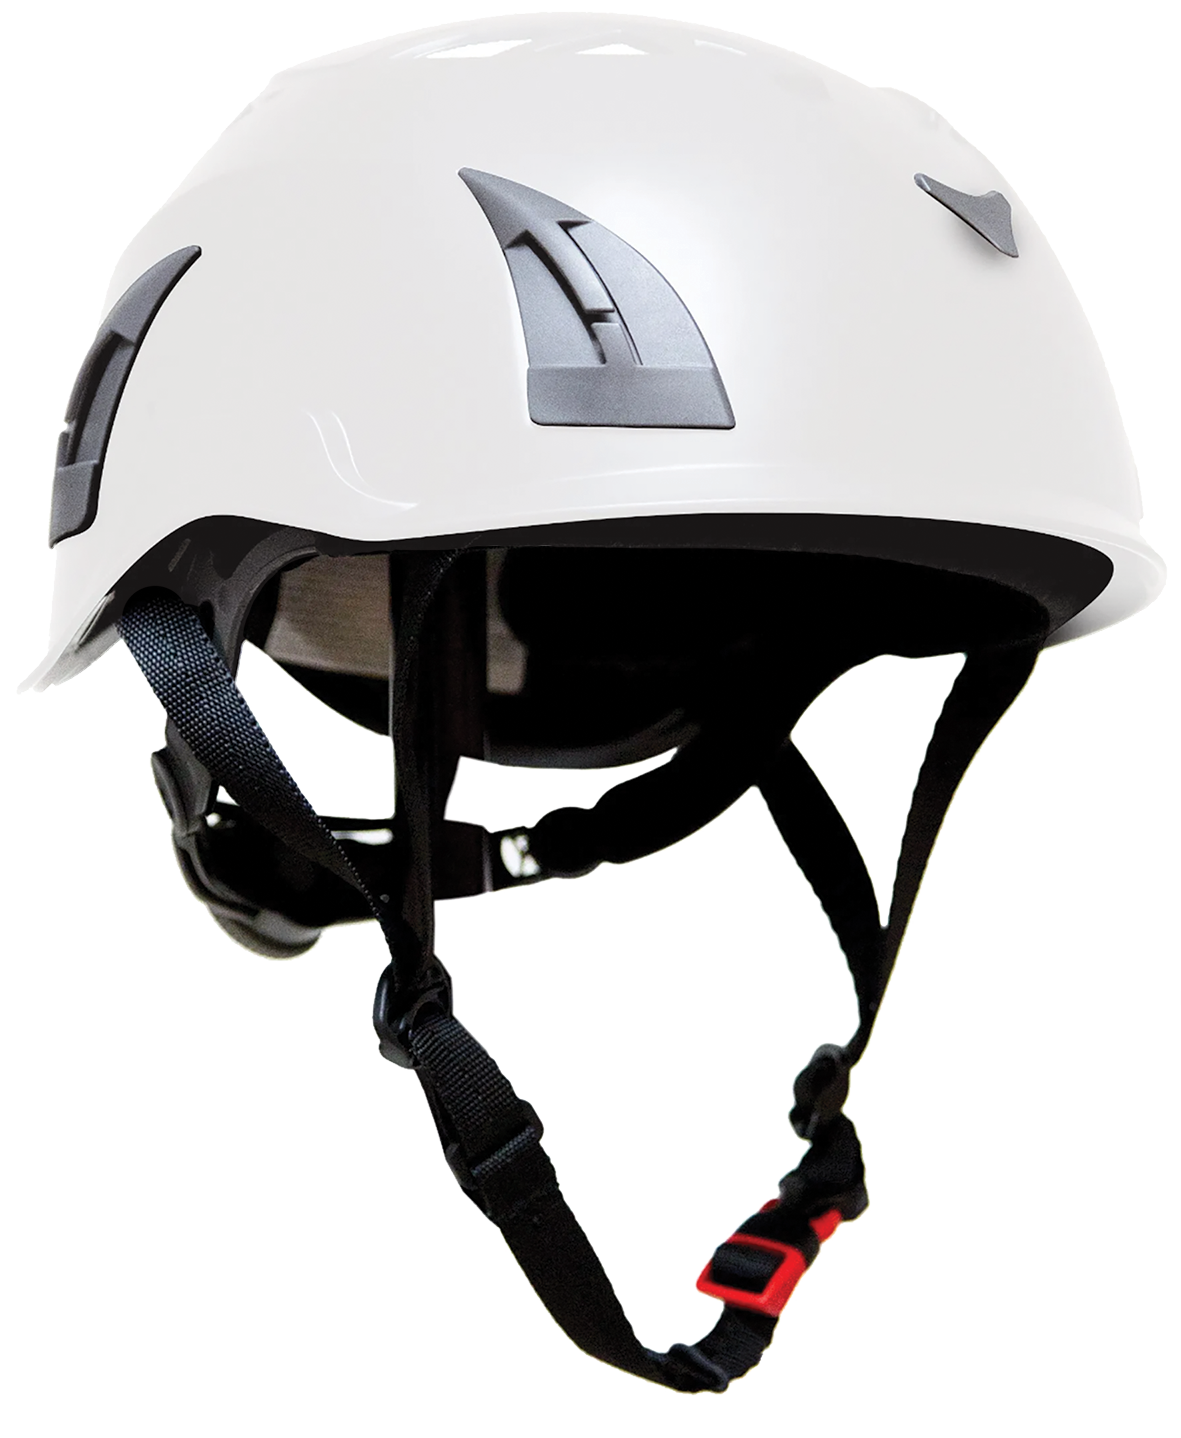 Armour Safety Products Ltd. - Armour Ground Industrial Helmet – EN397